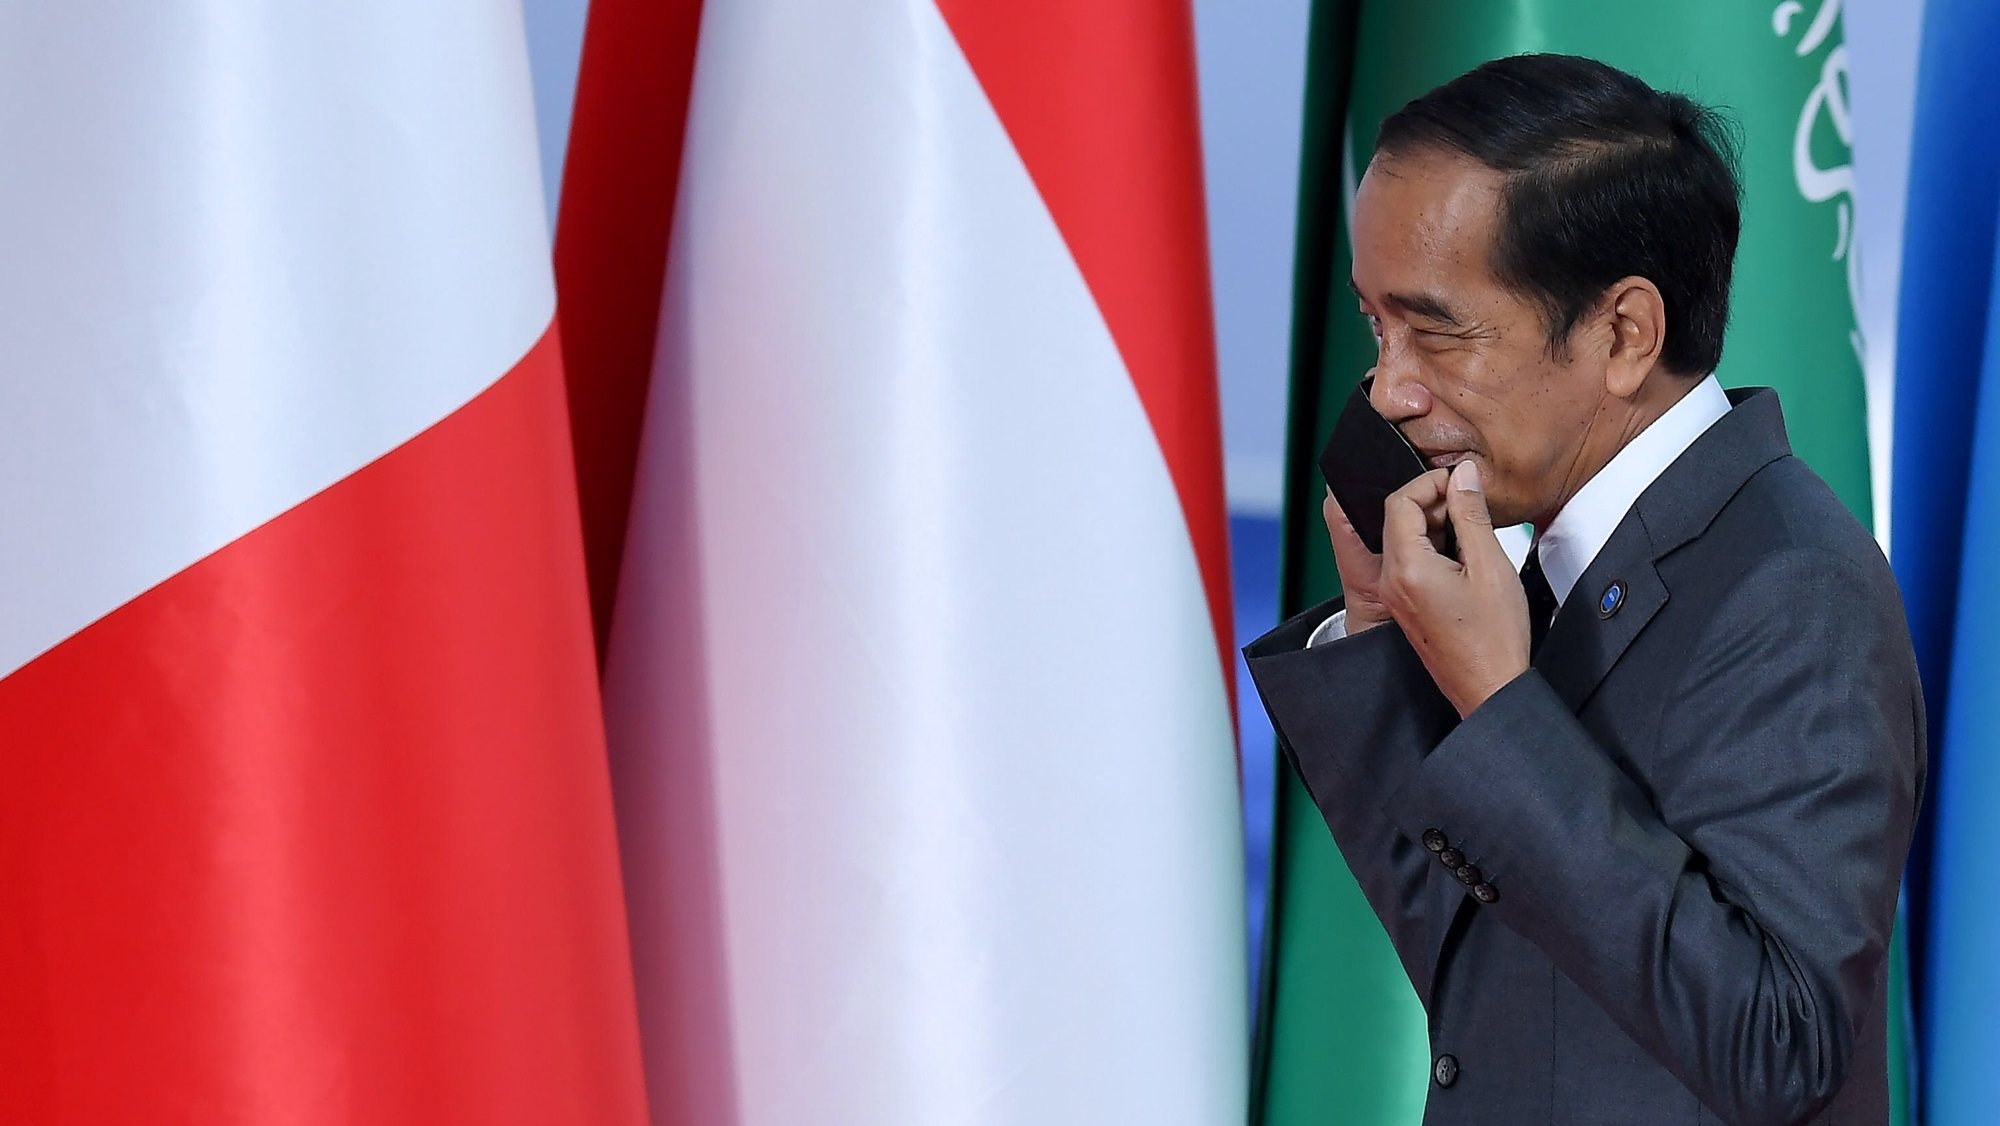 epa09553536 Indonesian President Joko Widodo removes his face mask as he arrives for the G20 Leaders&#039; Summit at La Nuvola Congress Centre in Rome, Italy, 30 October 2021. The Group of Twenty (G20) Heads of State and Government Summit will be held in Rome on 30 and 31 October 2021.  EPA/ETTORE FERRARI / POOL